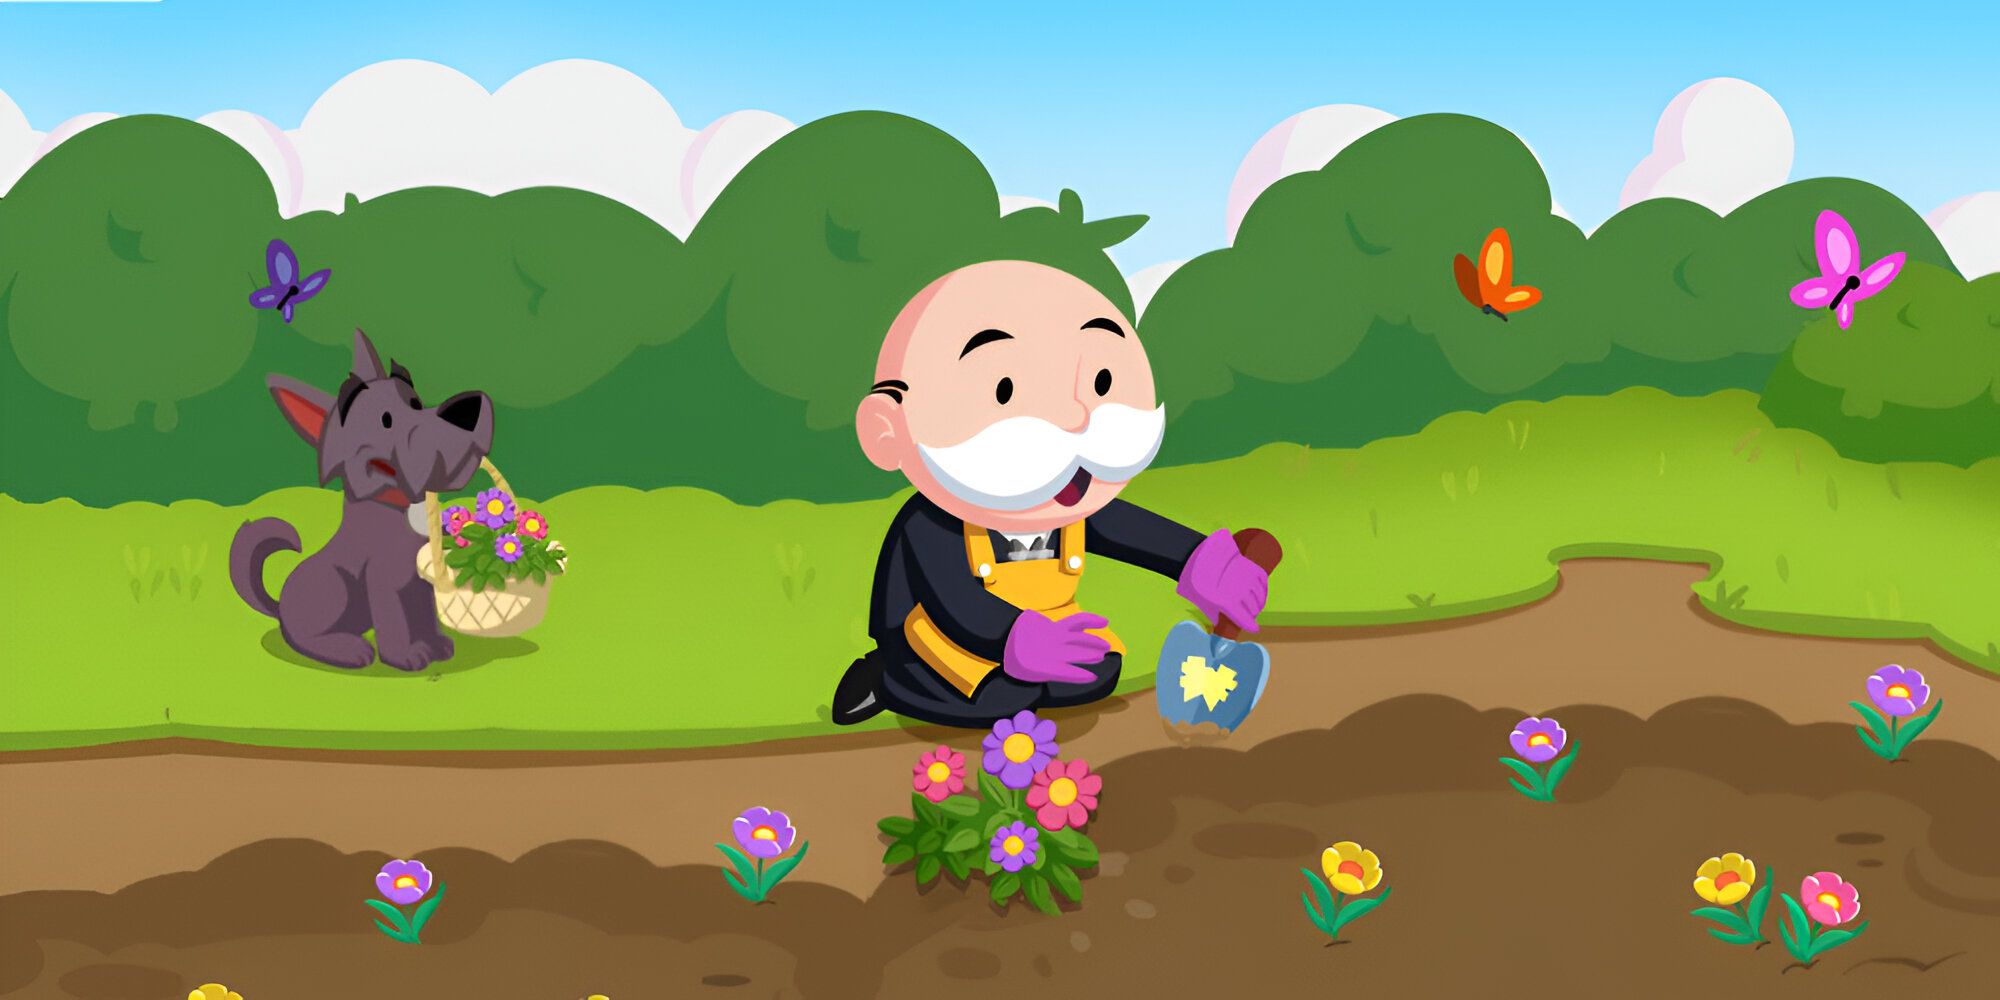 Mr. Monopoly from Monopoly GO! tending to a garden with his dog.